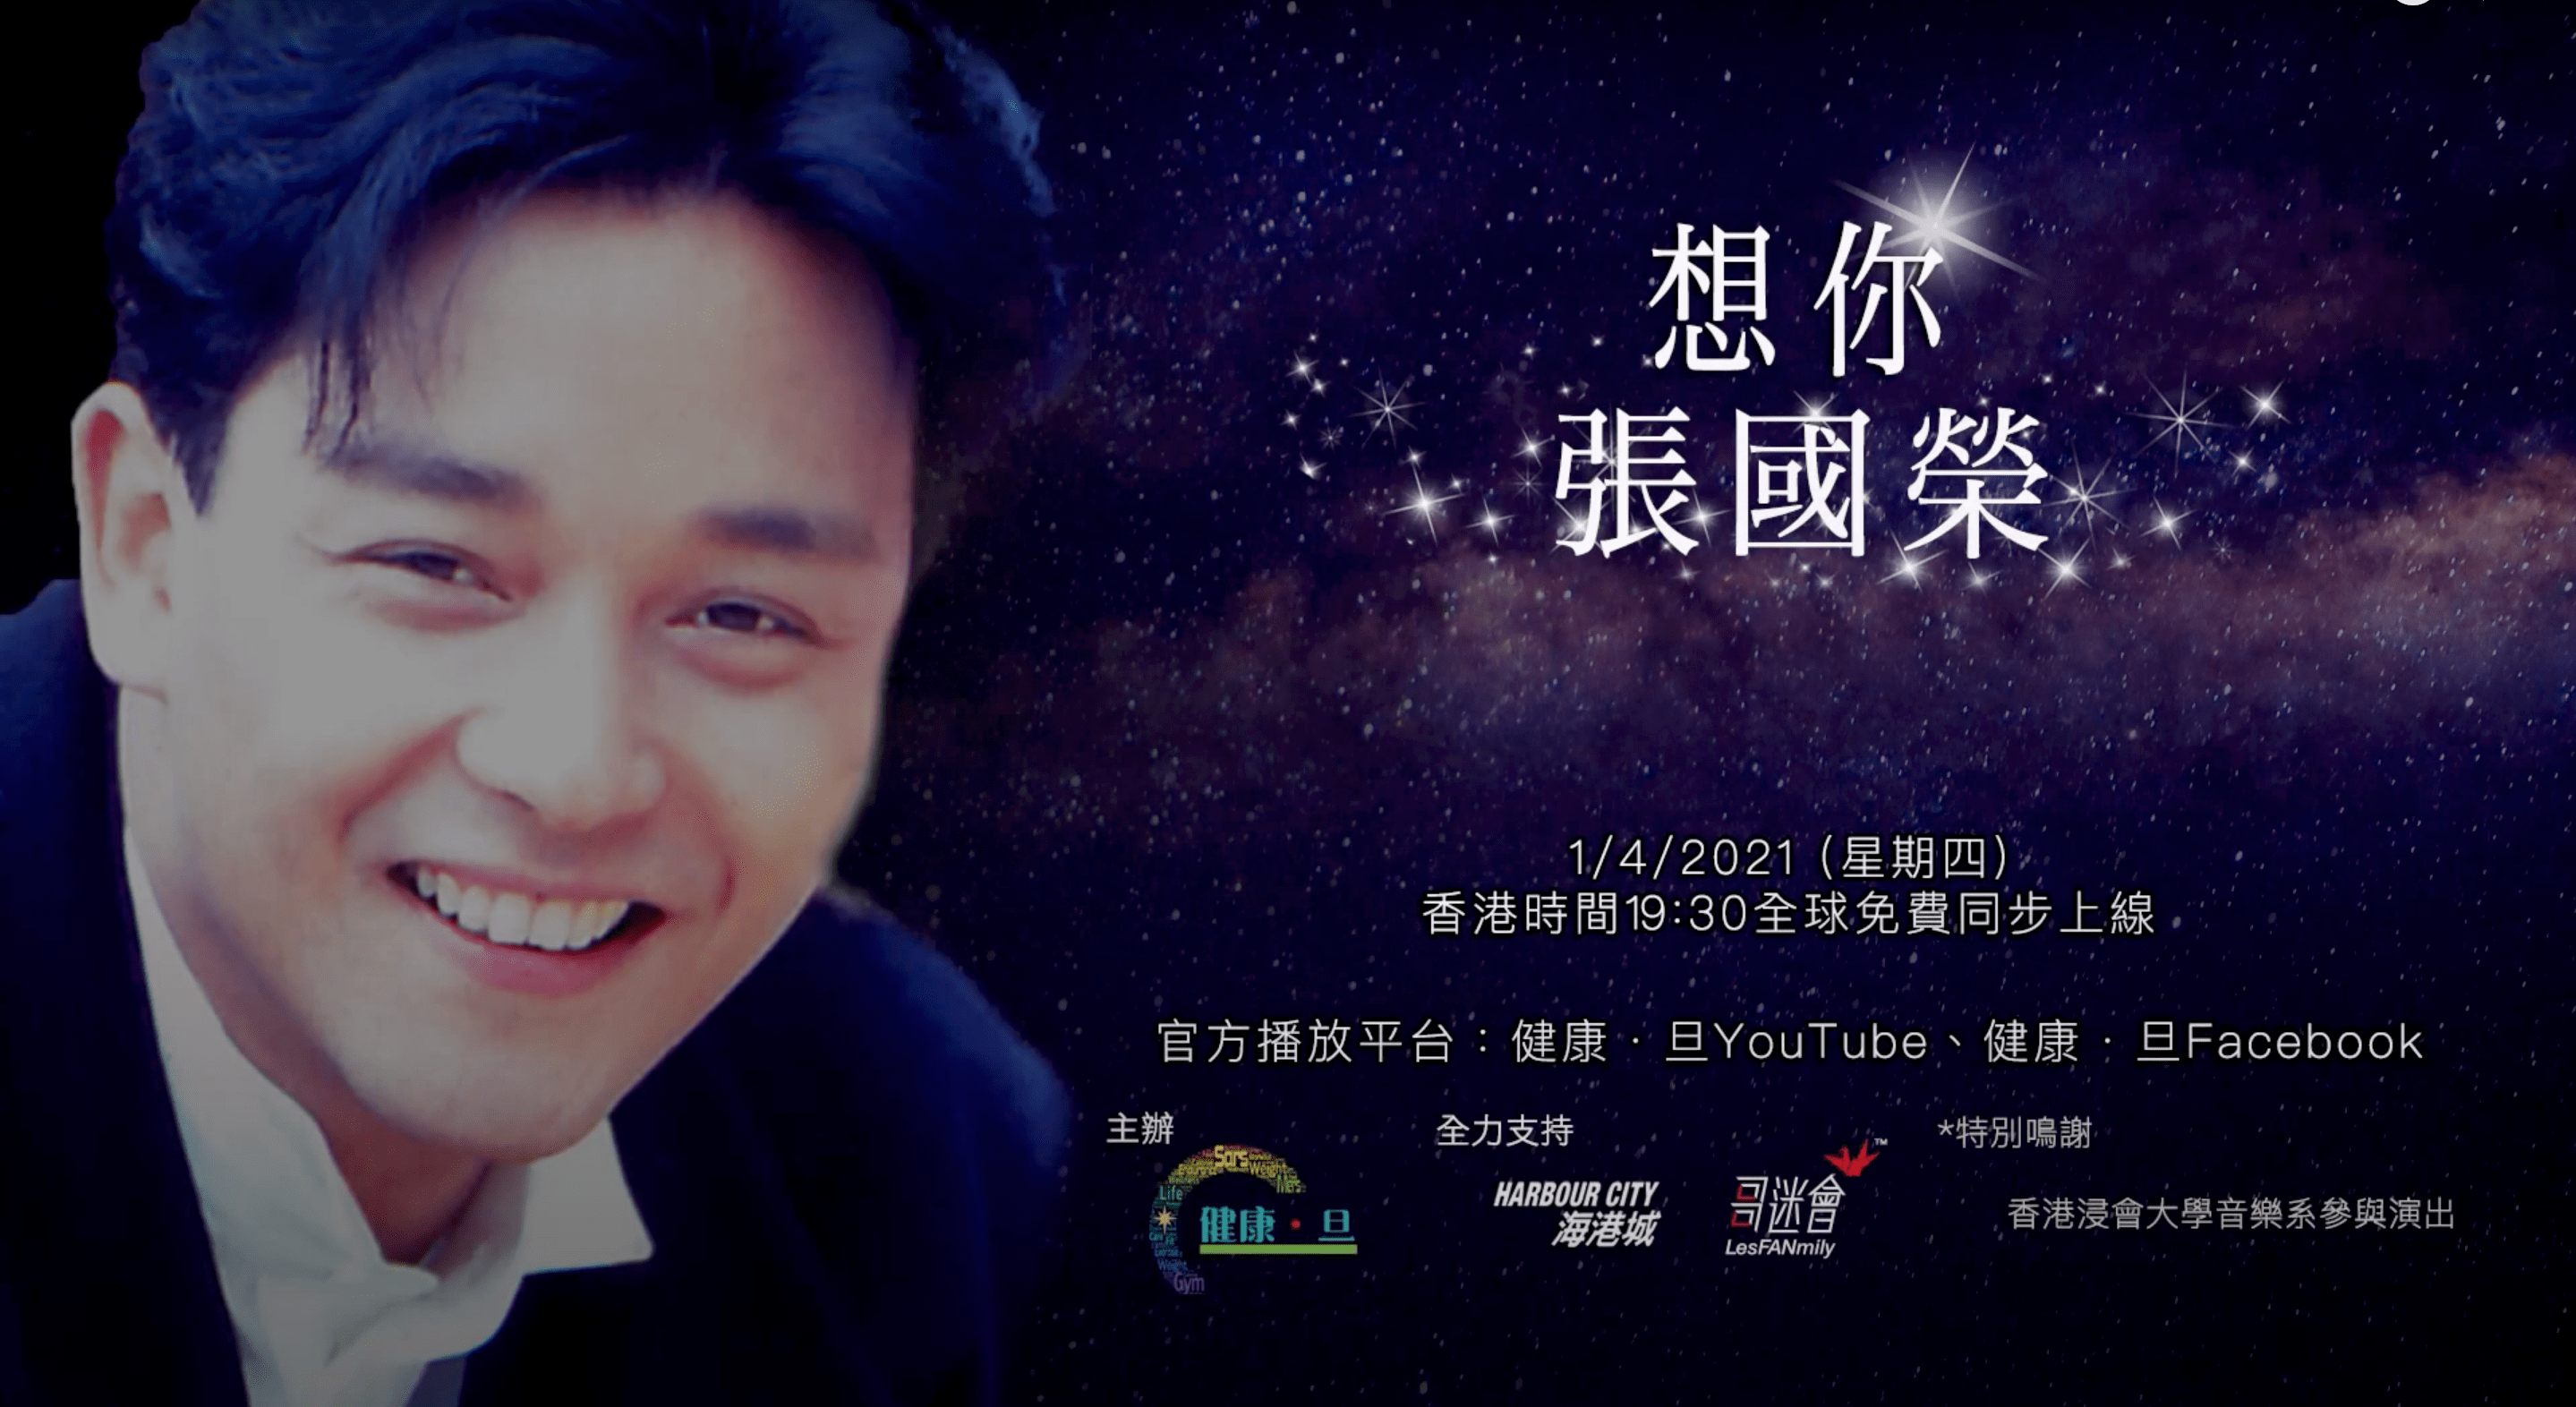 Leslie Cheung's memorial online concert to be held on Apr 1, features